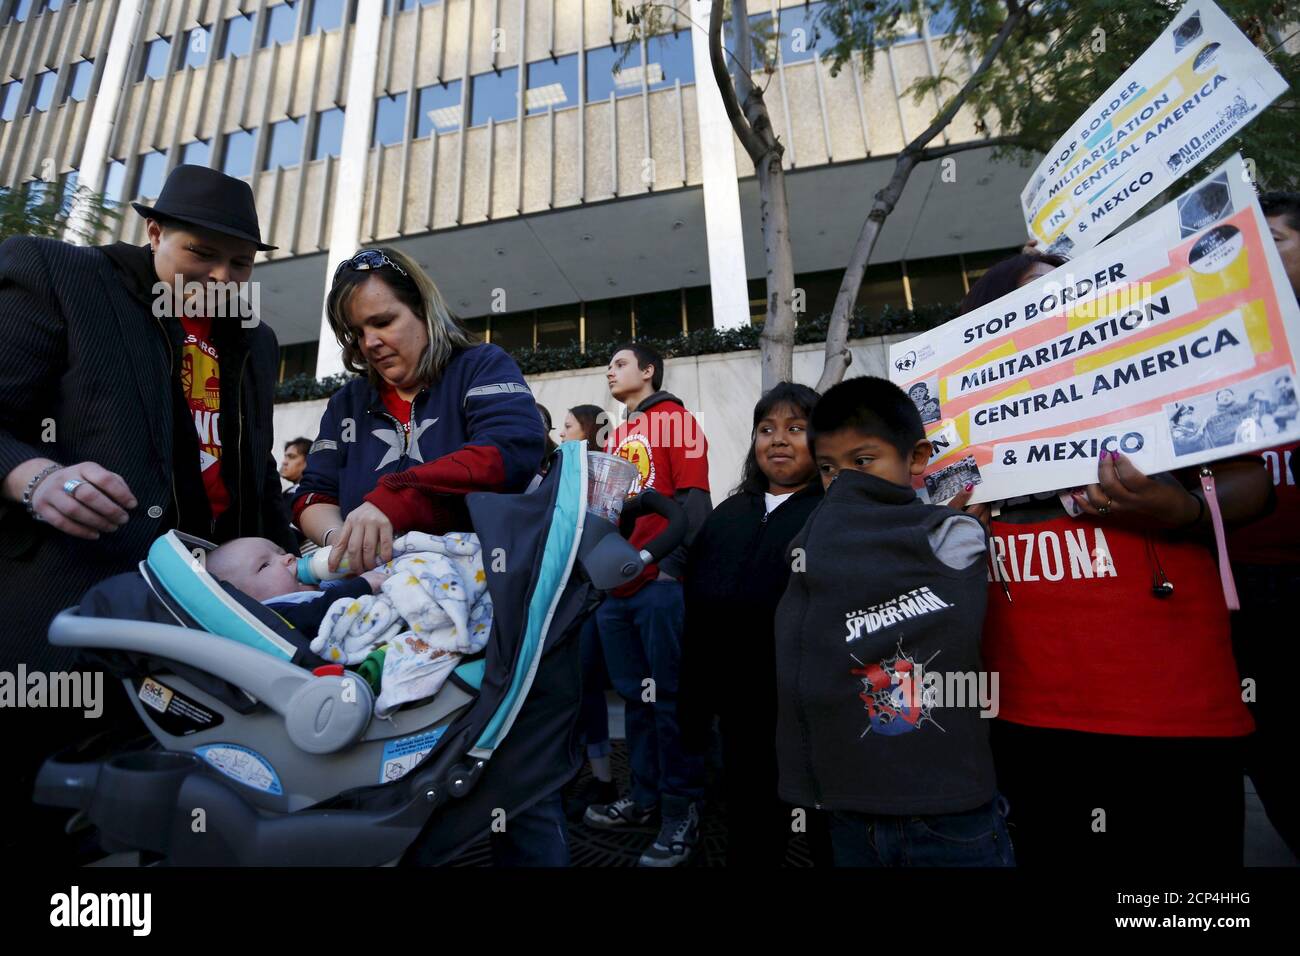 Holly Dias feeds her son Raiden Bailey as people gather outside a Federal Building while protesting against Immigration and Customs Enforcement (ICE) raids on Central American refugees in Los Angeles, California, January 26, 2016.   REUTERS/Mario Anzuoni Stock Photo